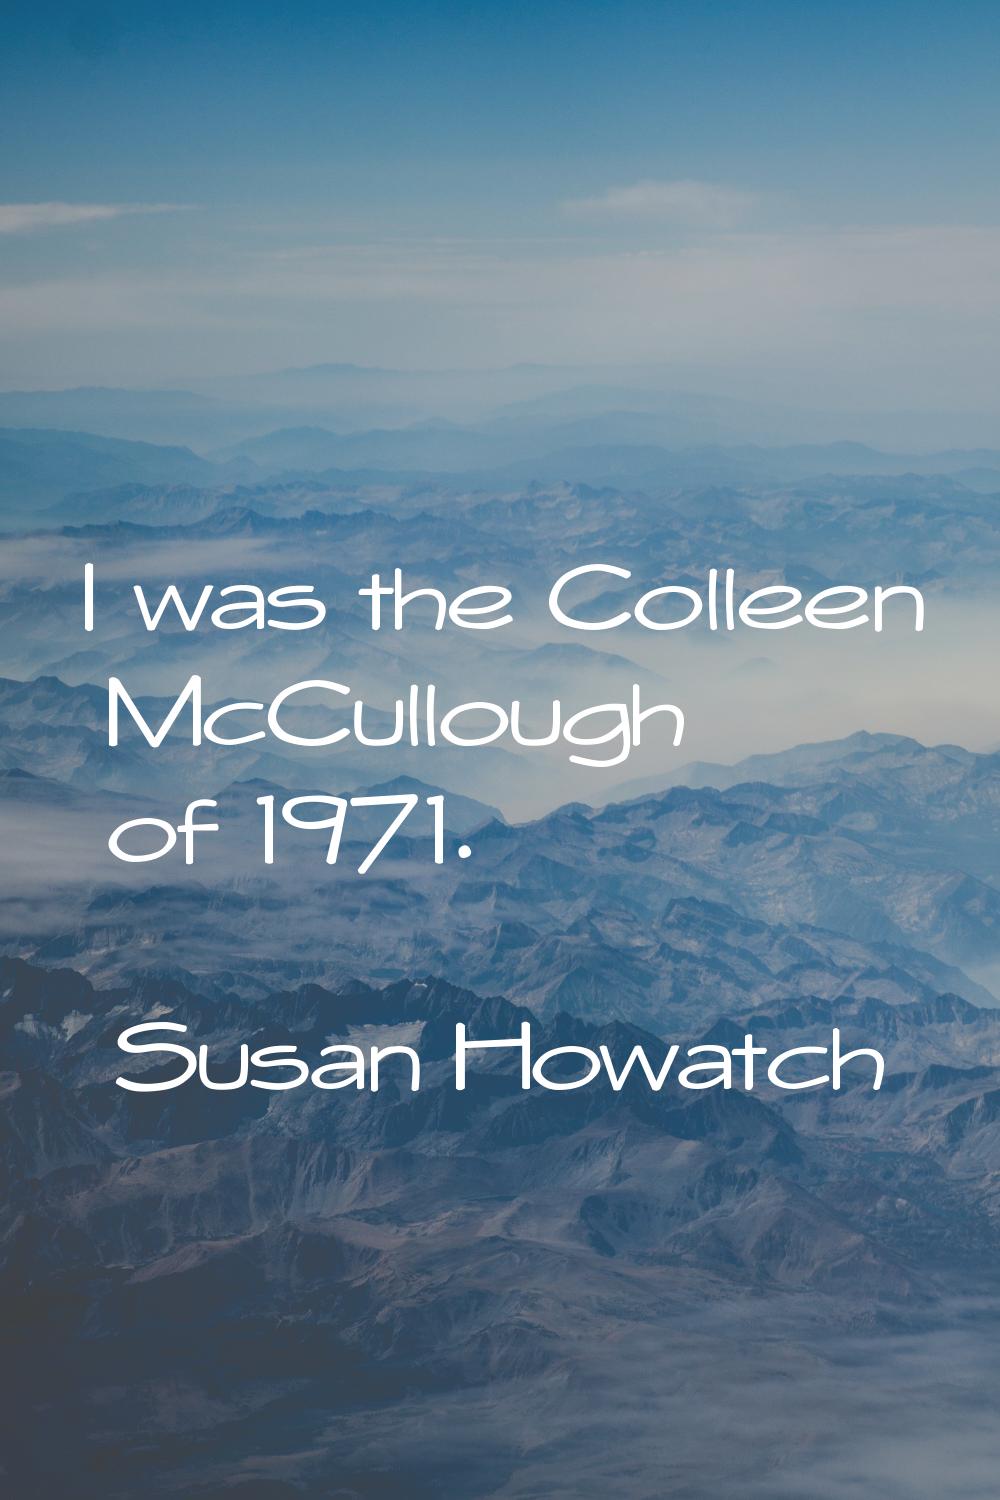 I was the Colleen McCullough of 1971.